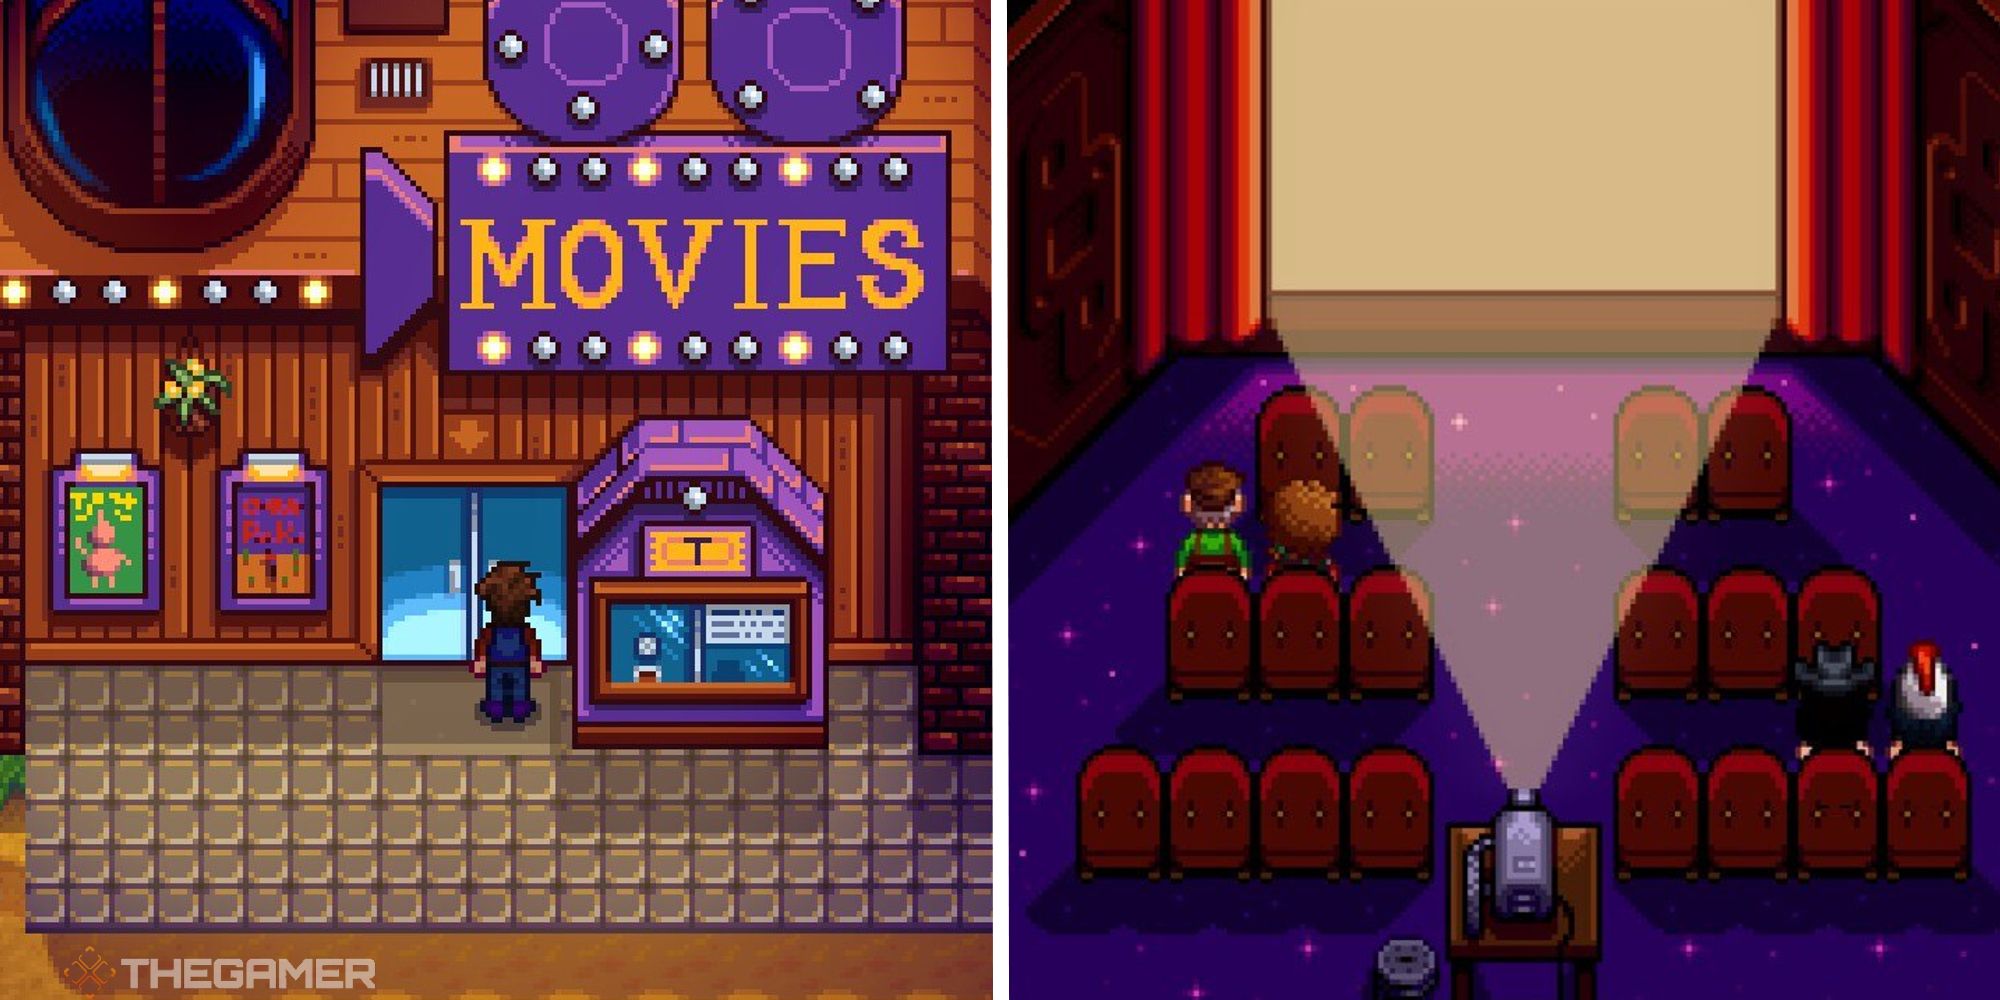 split image showing movie theatre outside and interior